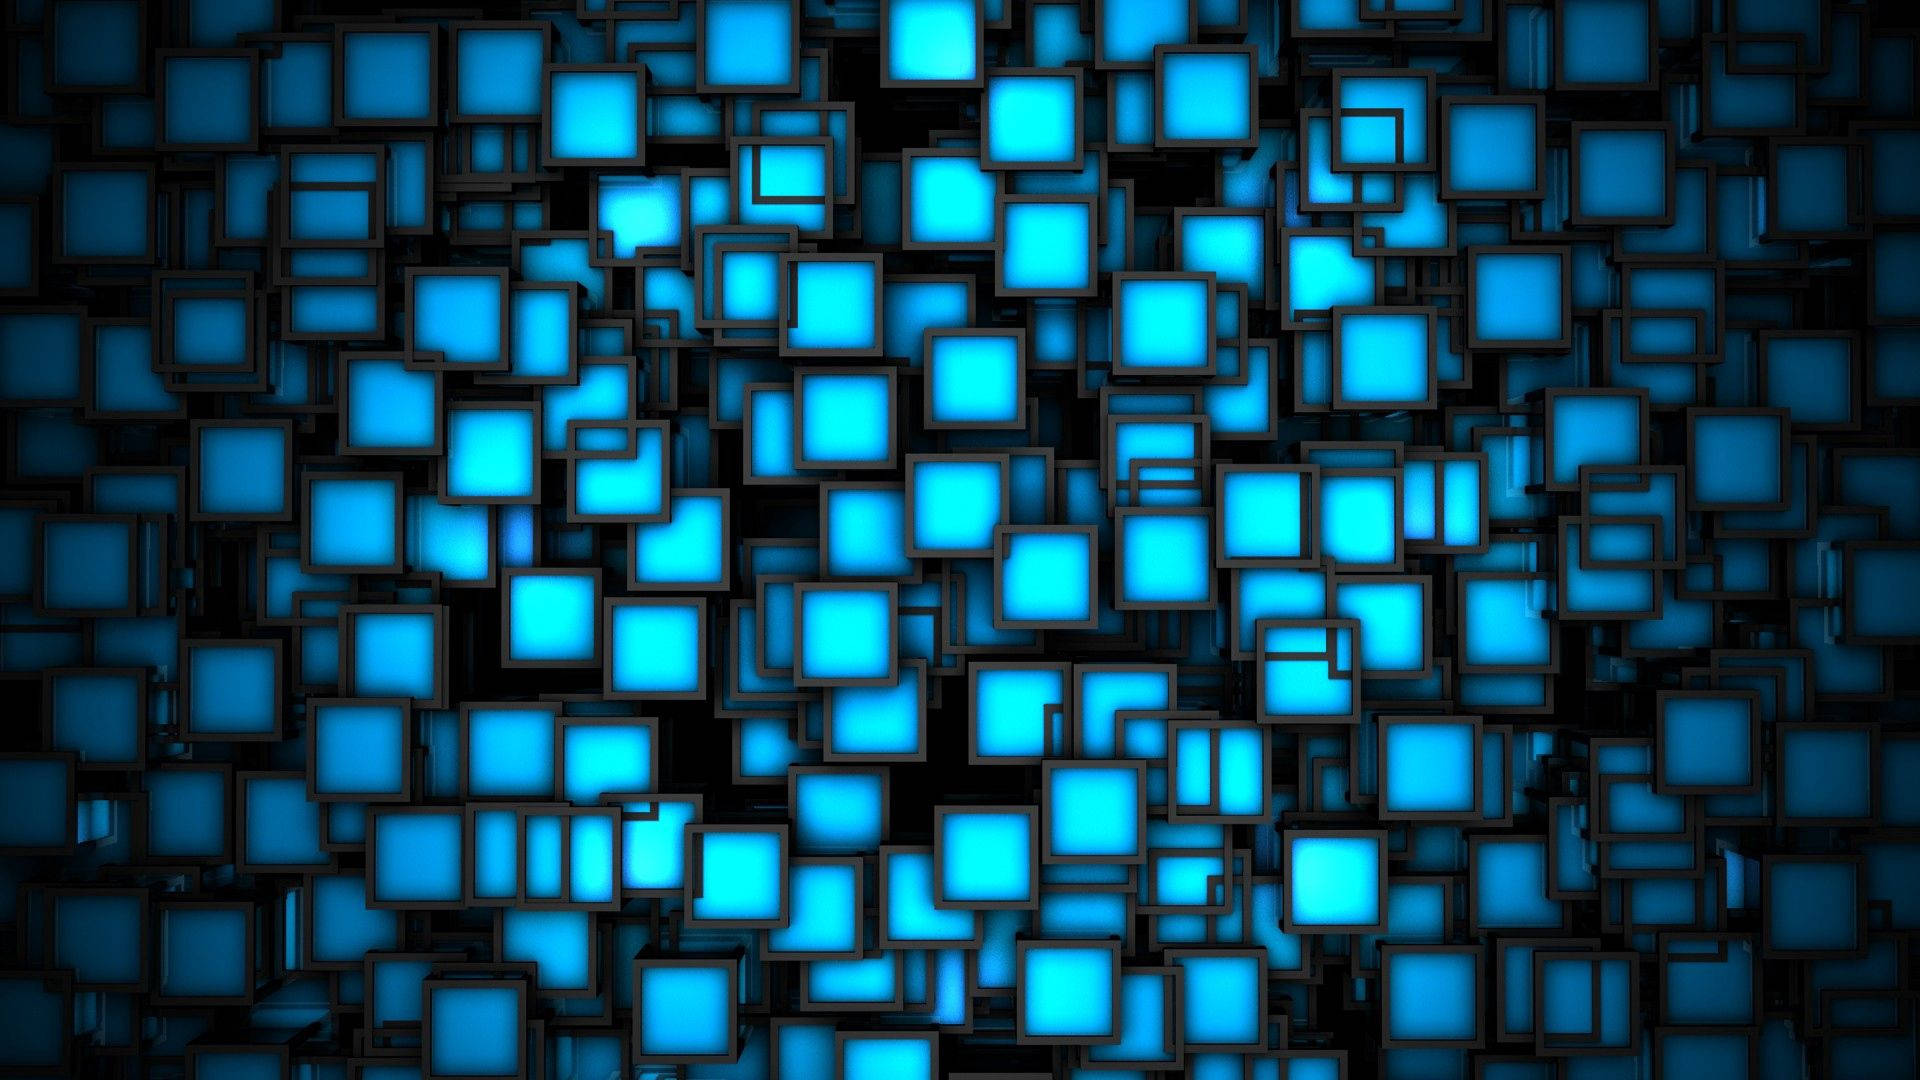 Geometric Pattern Of Blue Squares And Black Background Background